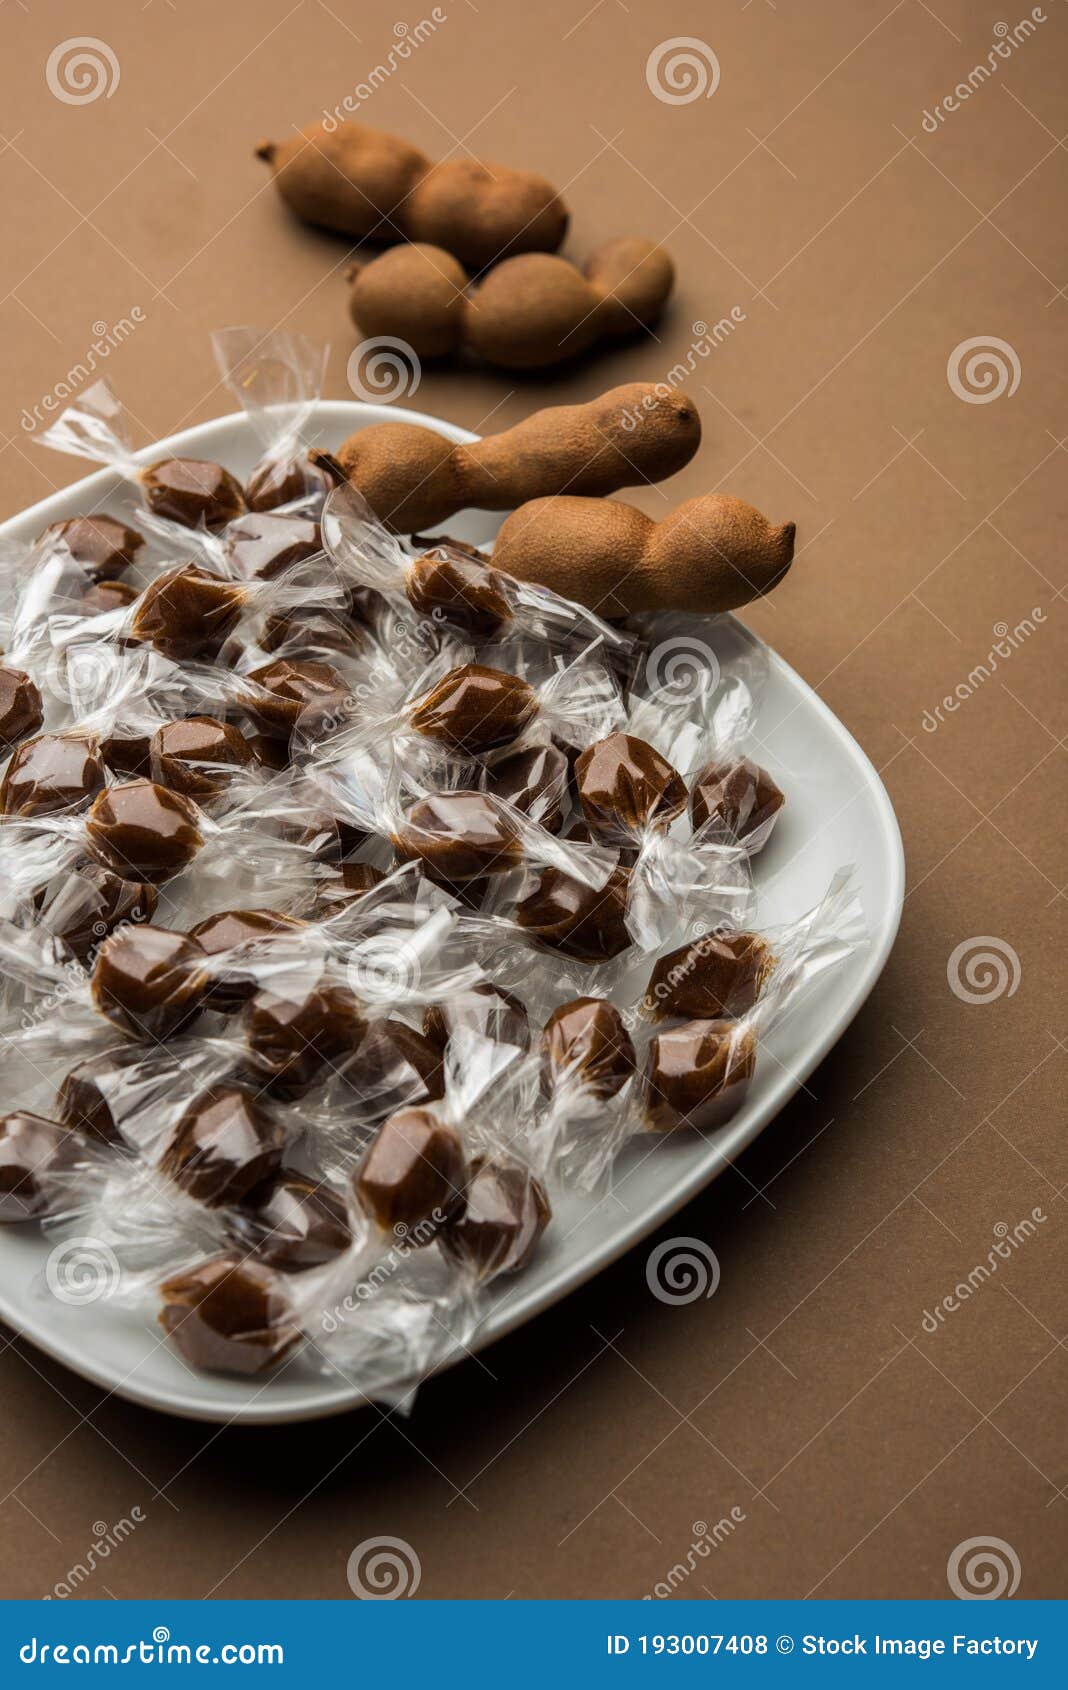 1 073 Tamarind Candy Photos Free Royalty Free Stock Photos From Dreamstime